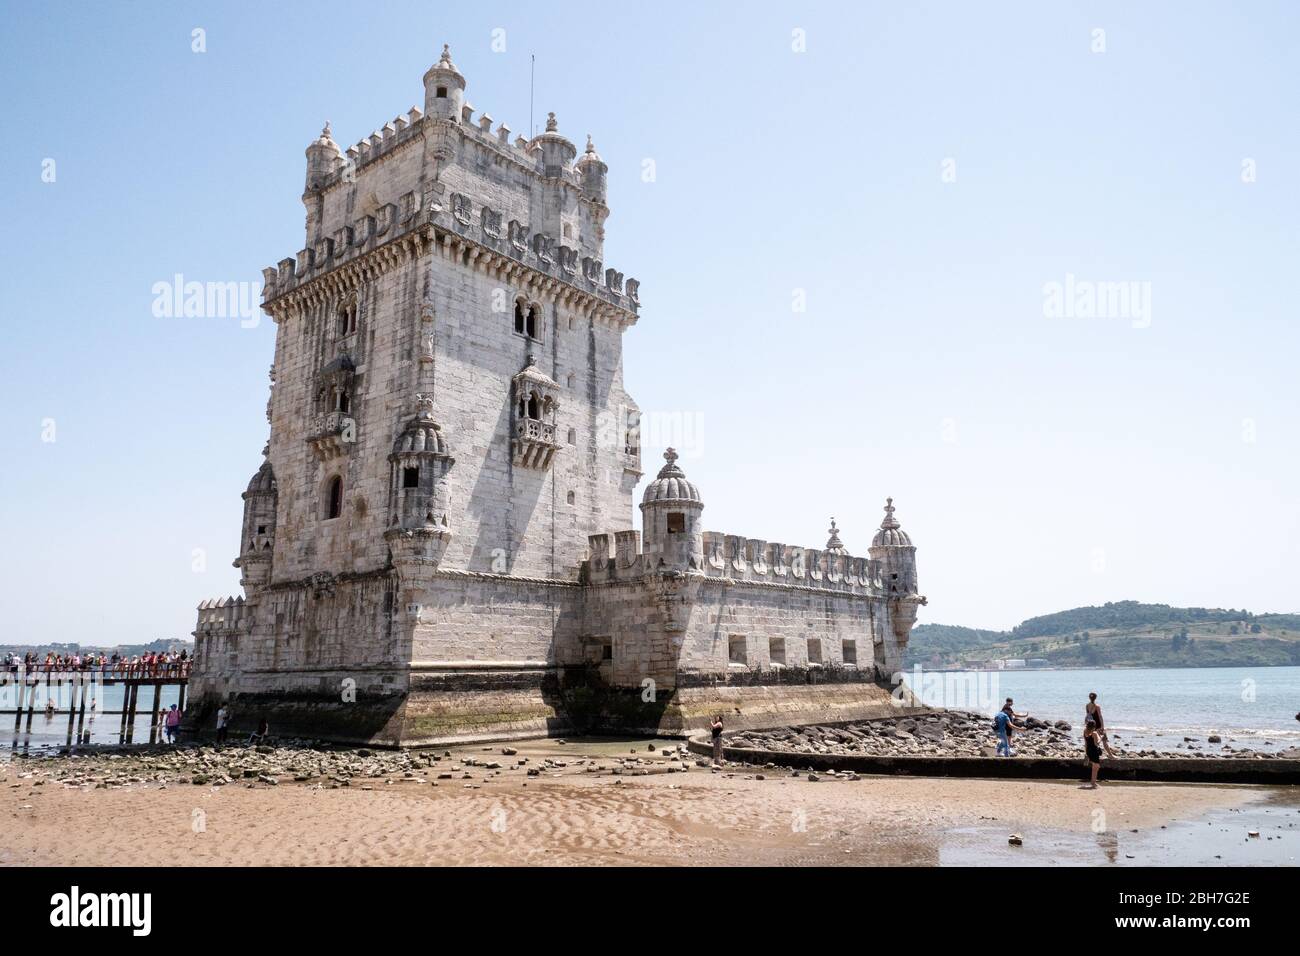 Torre de Belem, Lisboa, Portugal. The popular Lisbon landmark, The Belem Tower on the Tagus River with a line of tourists waiting to enter. Stock Photo